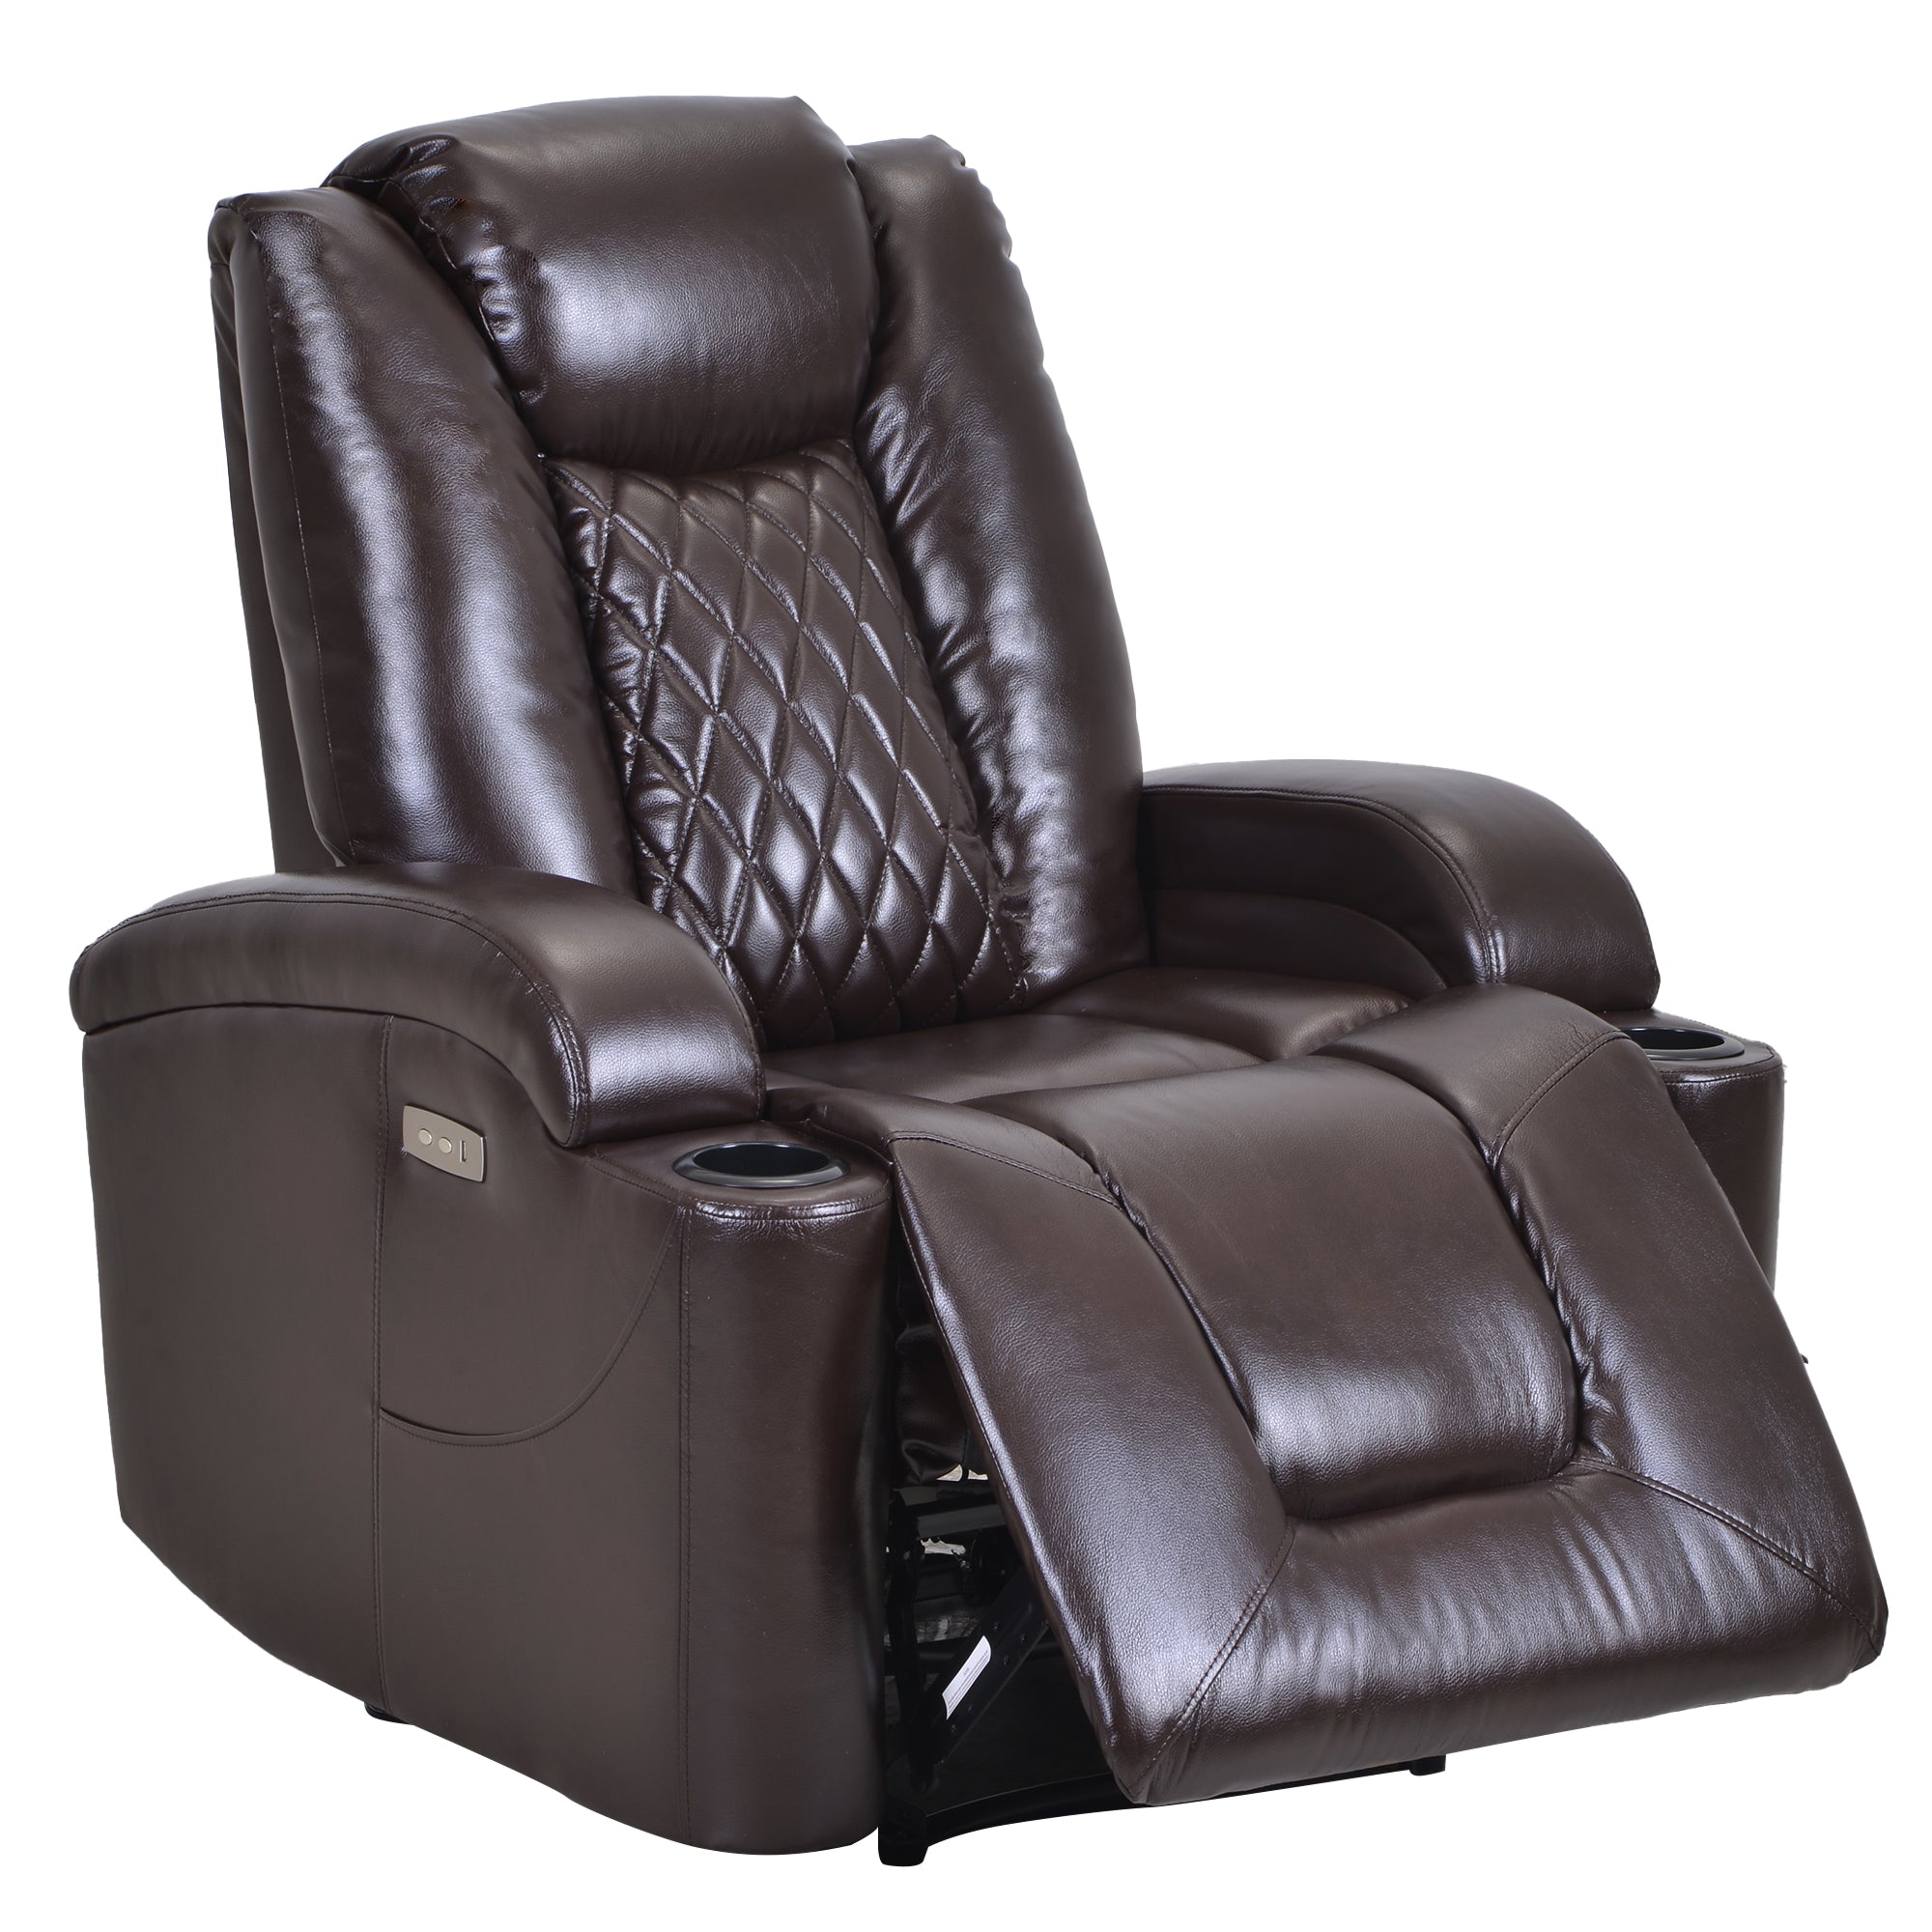 RaDEWAY Power Motion Recliner with USB Charge Port and Cup Holder -PU Lounge chair for Living Room